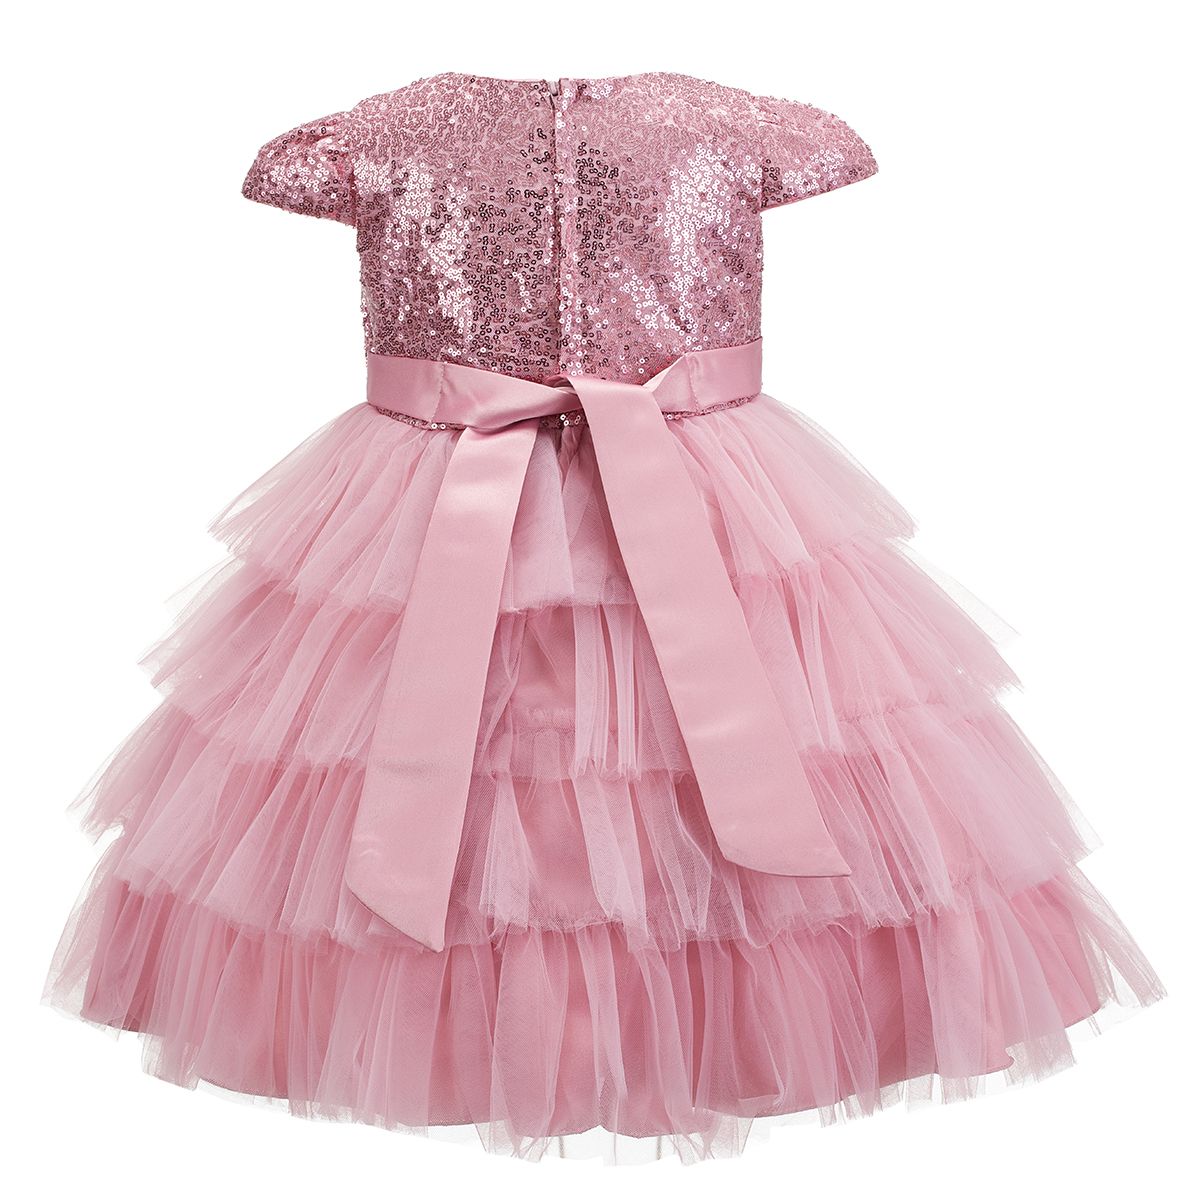 D.pink Tulle Layered Dress